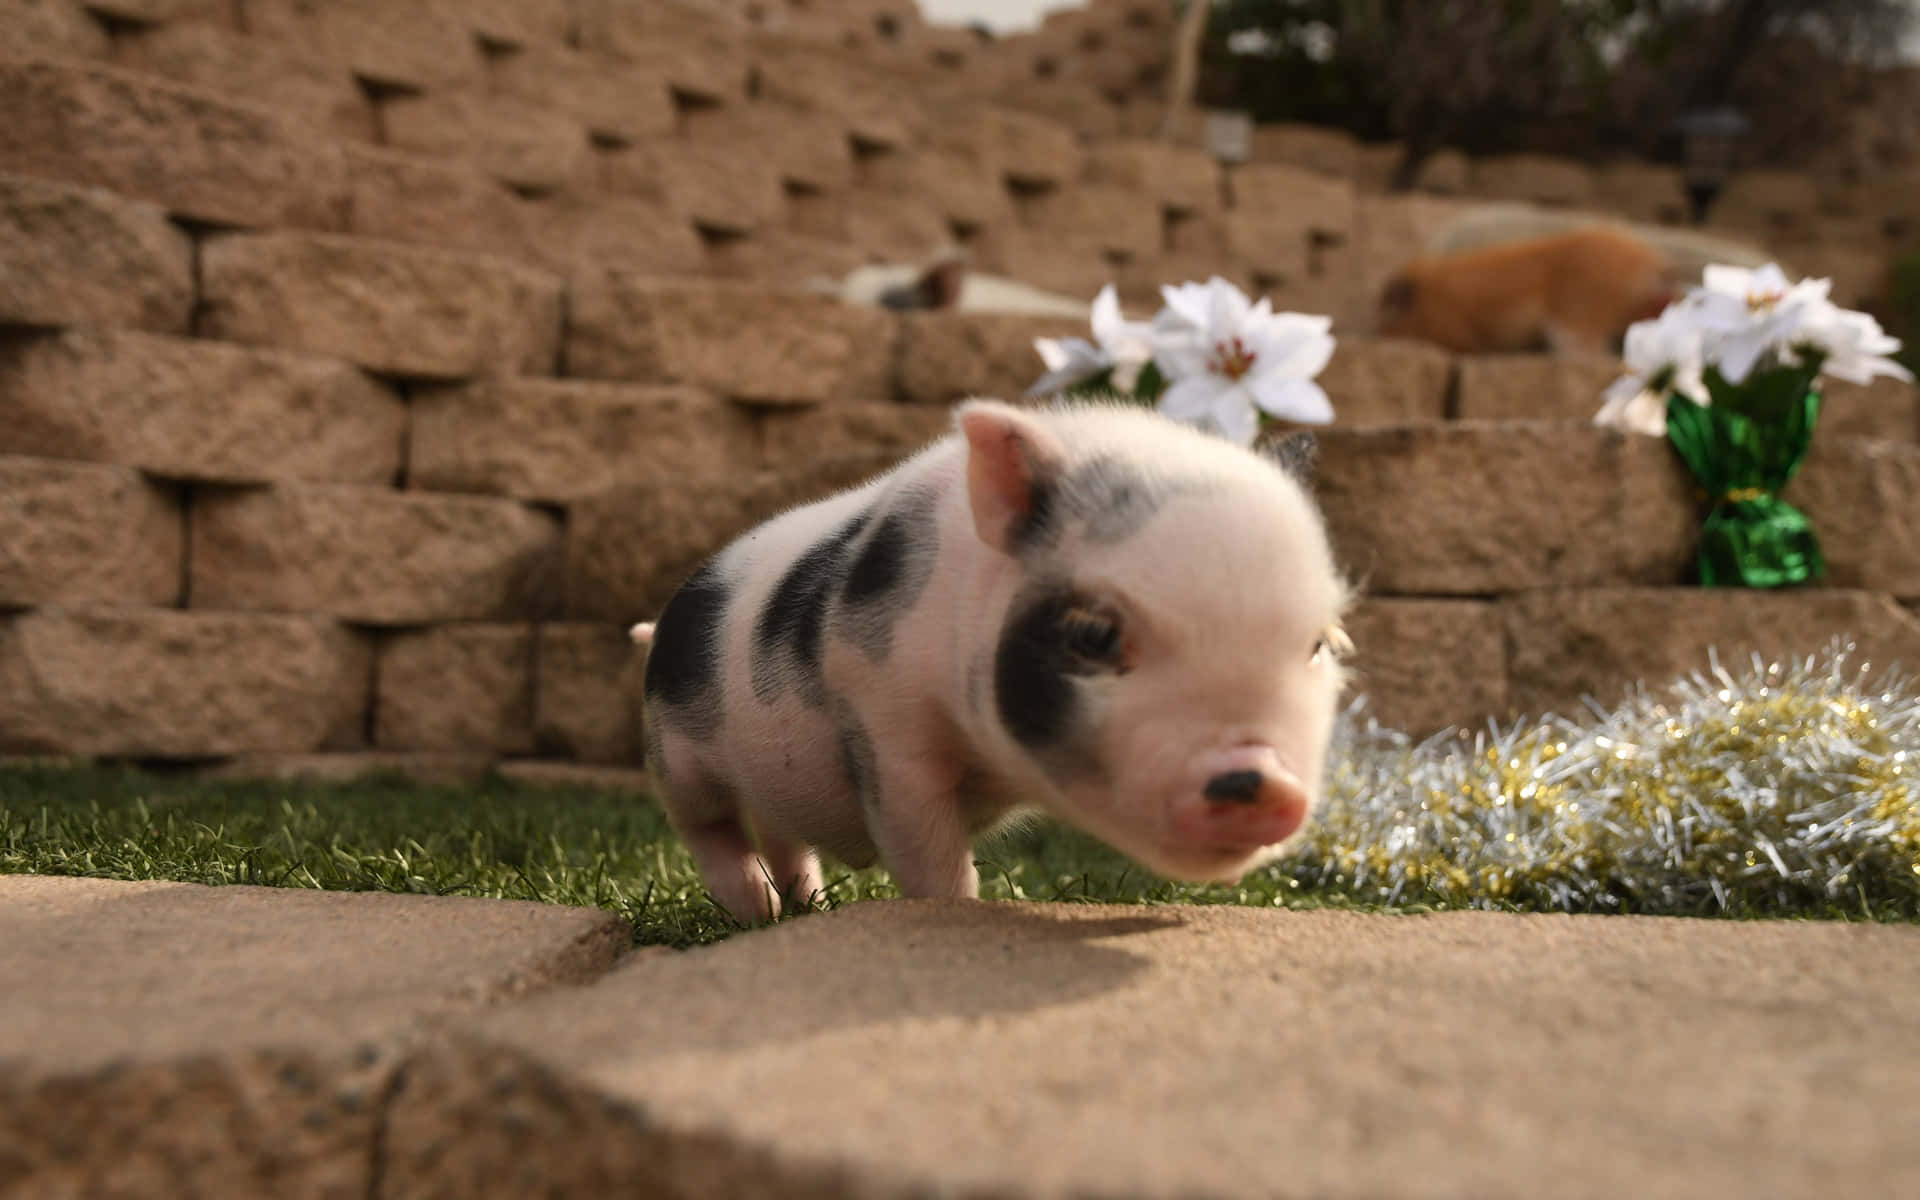 "adorable Piglet In Lush Greenery"